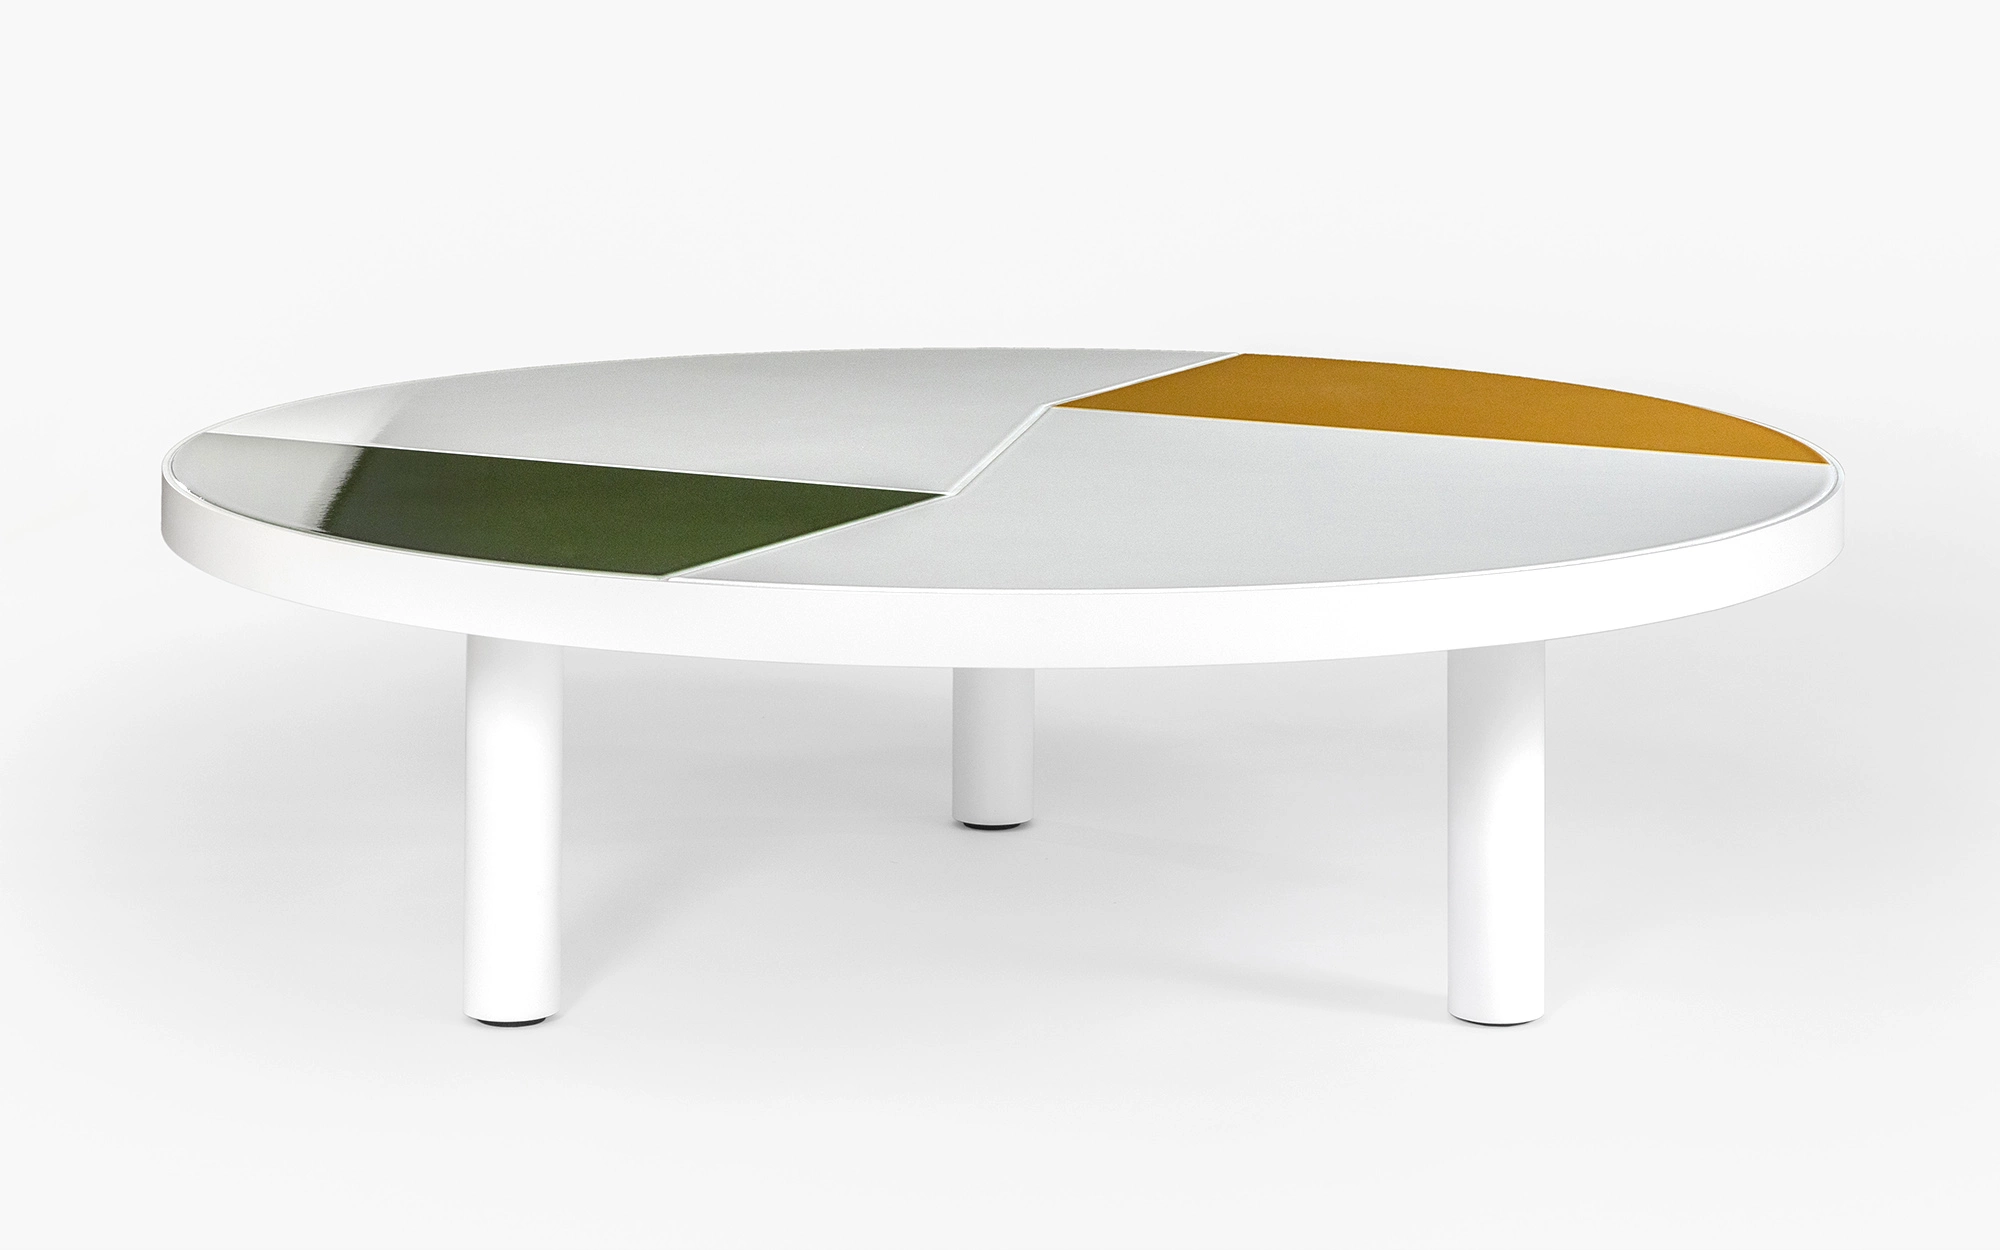 Fraction Coffee Table - Pierre Charpin - Coffee table - Galerie kreo